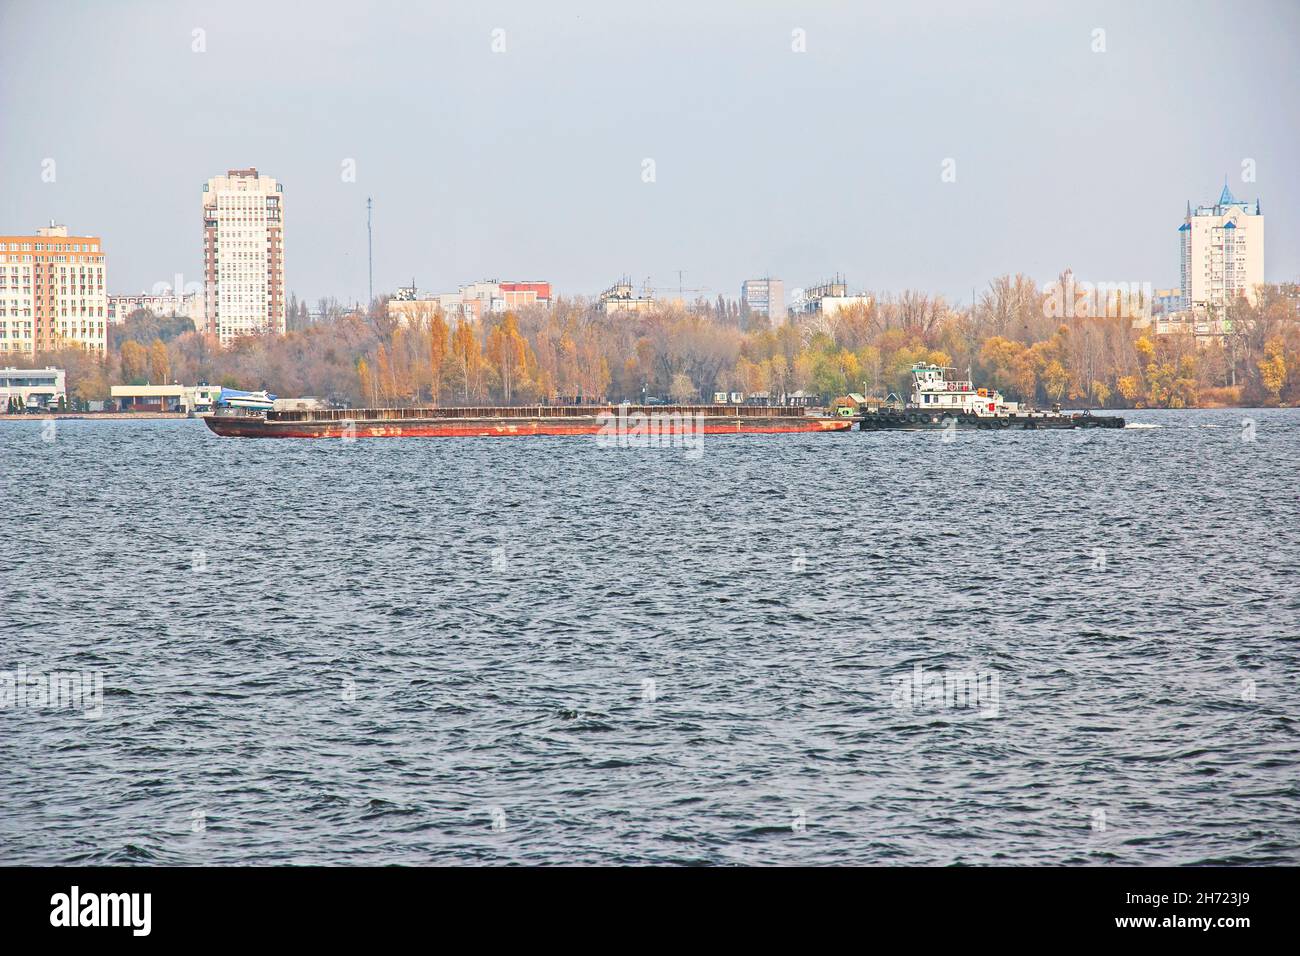 An articulated tug and bulk barge transport sand and construction materials along the river. A large barge sails along the wide Dnieper River. Transpo Stock Photo